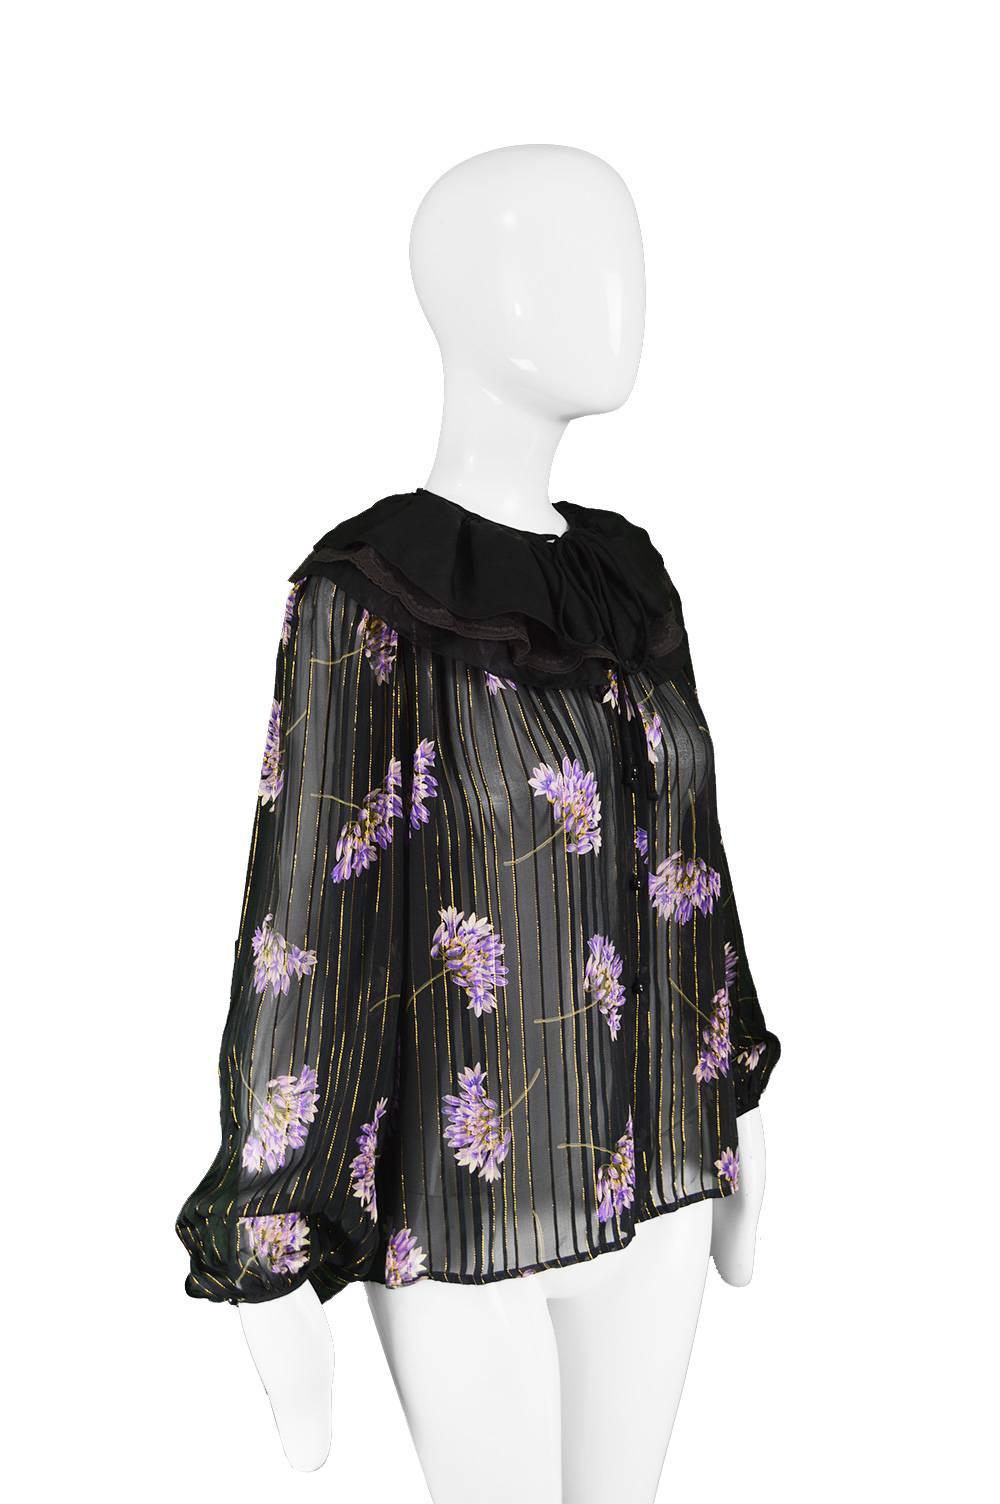 Women's Valentino Silk and Lamé Chiffon Sheer Floral Ruffle Collar Vintage Blouse, 1980s